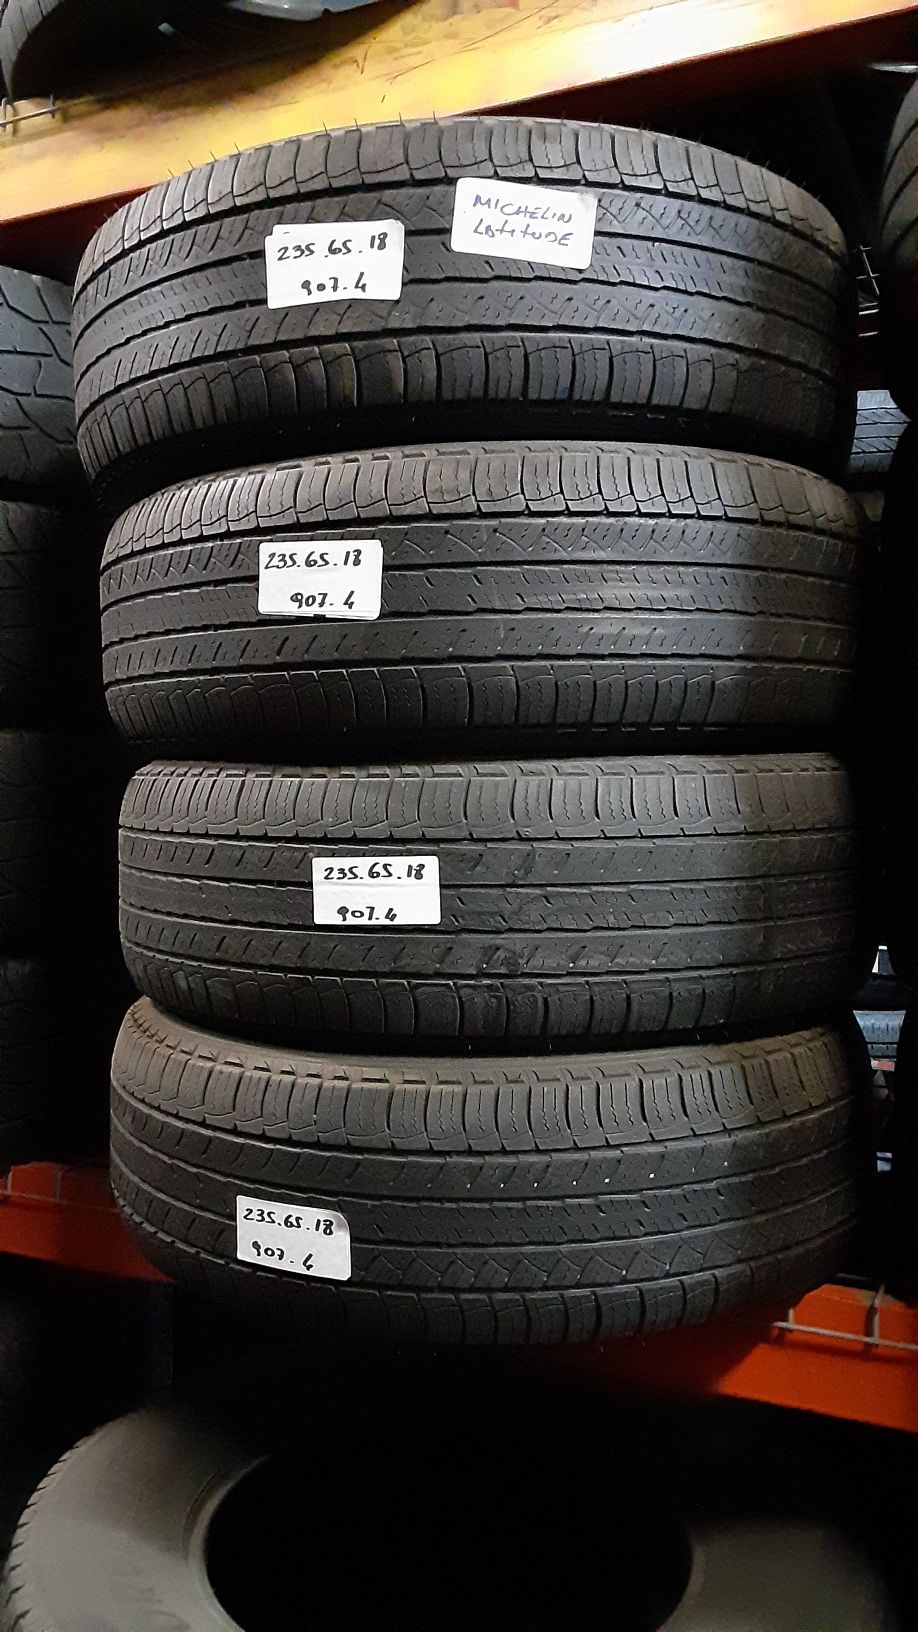 P235/65R18 MICHELIN LATITUDE 235/65R18 MATCHING FULL SET USED TIRES 235 65 18